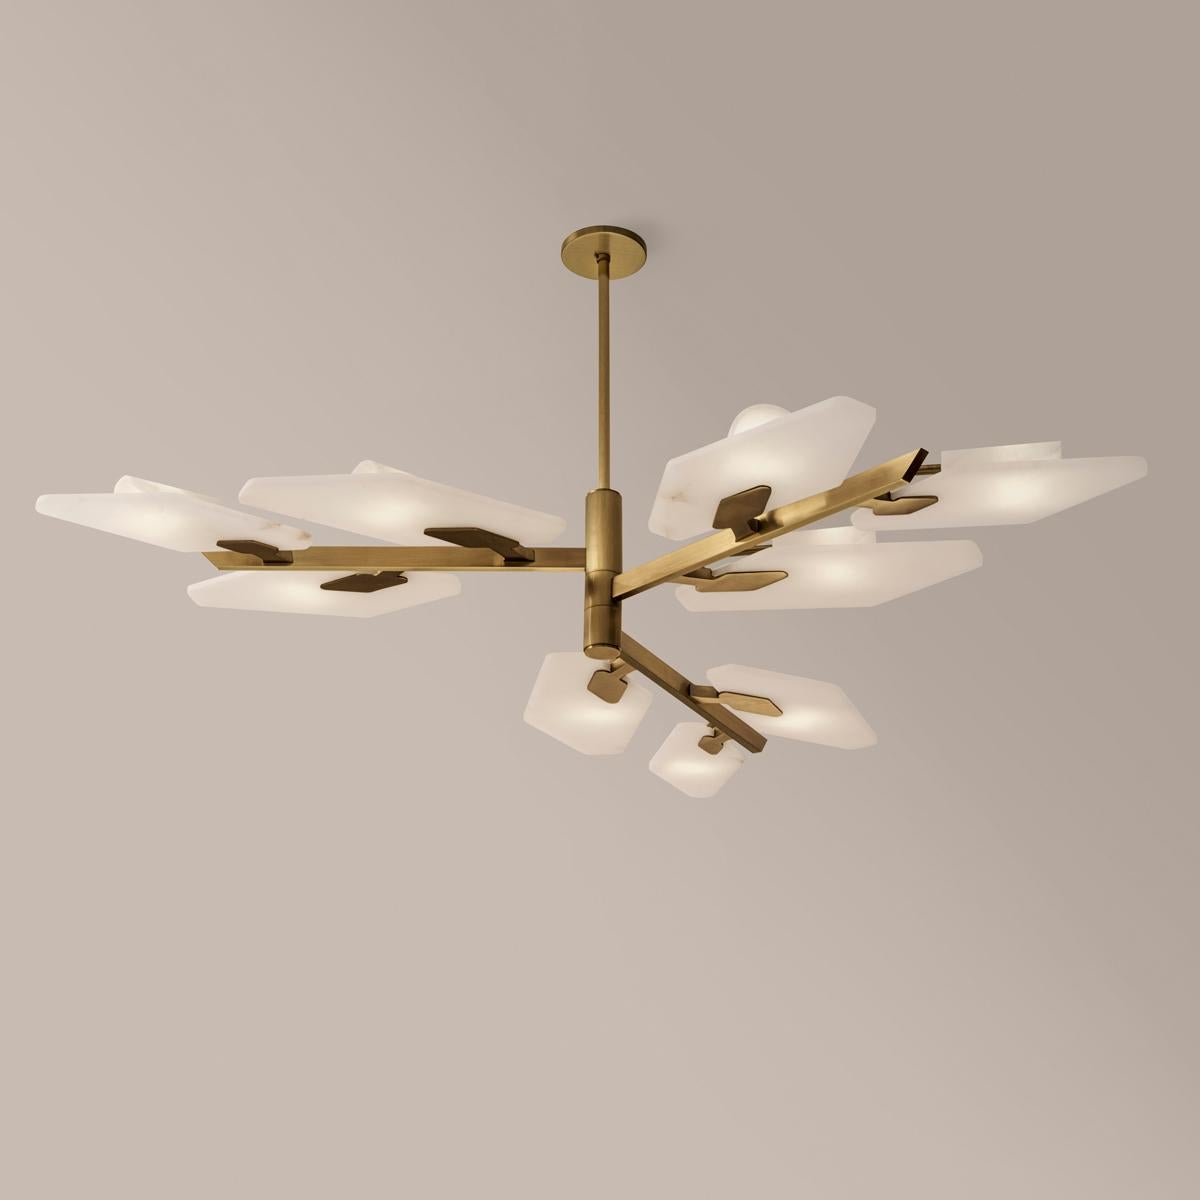 The Leaf ceiling light recalls nature with its branching arms and Tuscan alabaster “leaves” giving it a distinctive modern organic look.

Shown in the primary images in satin brass-subsequent pictures show the fixture in Bronzo Ottone.

Starting at